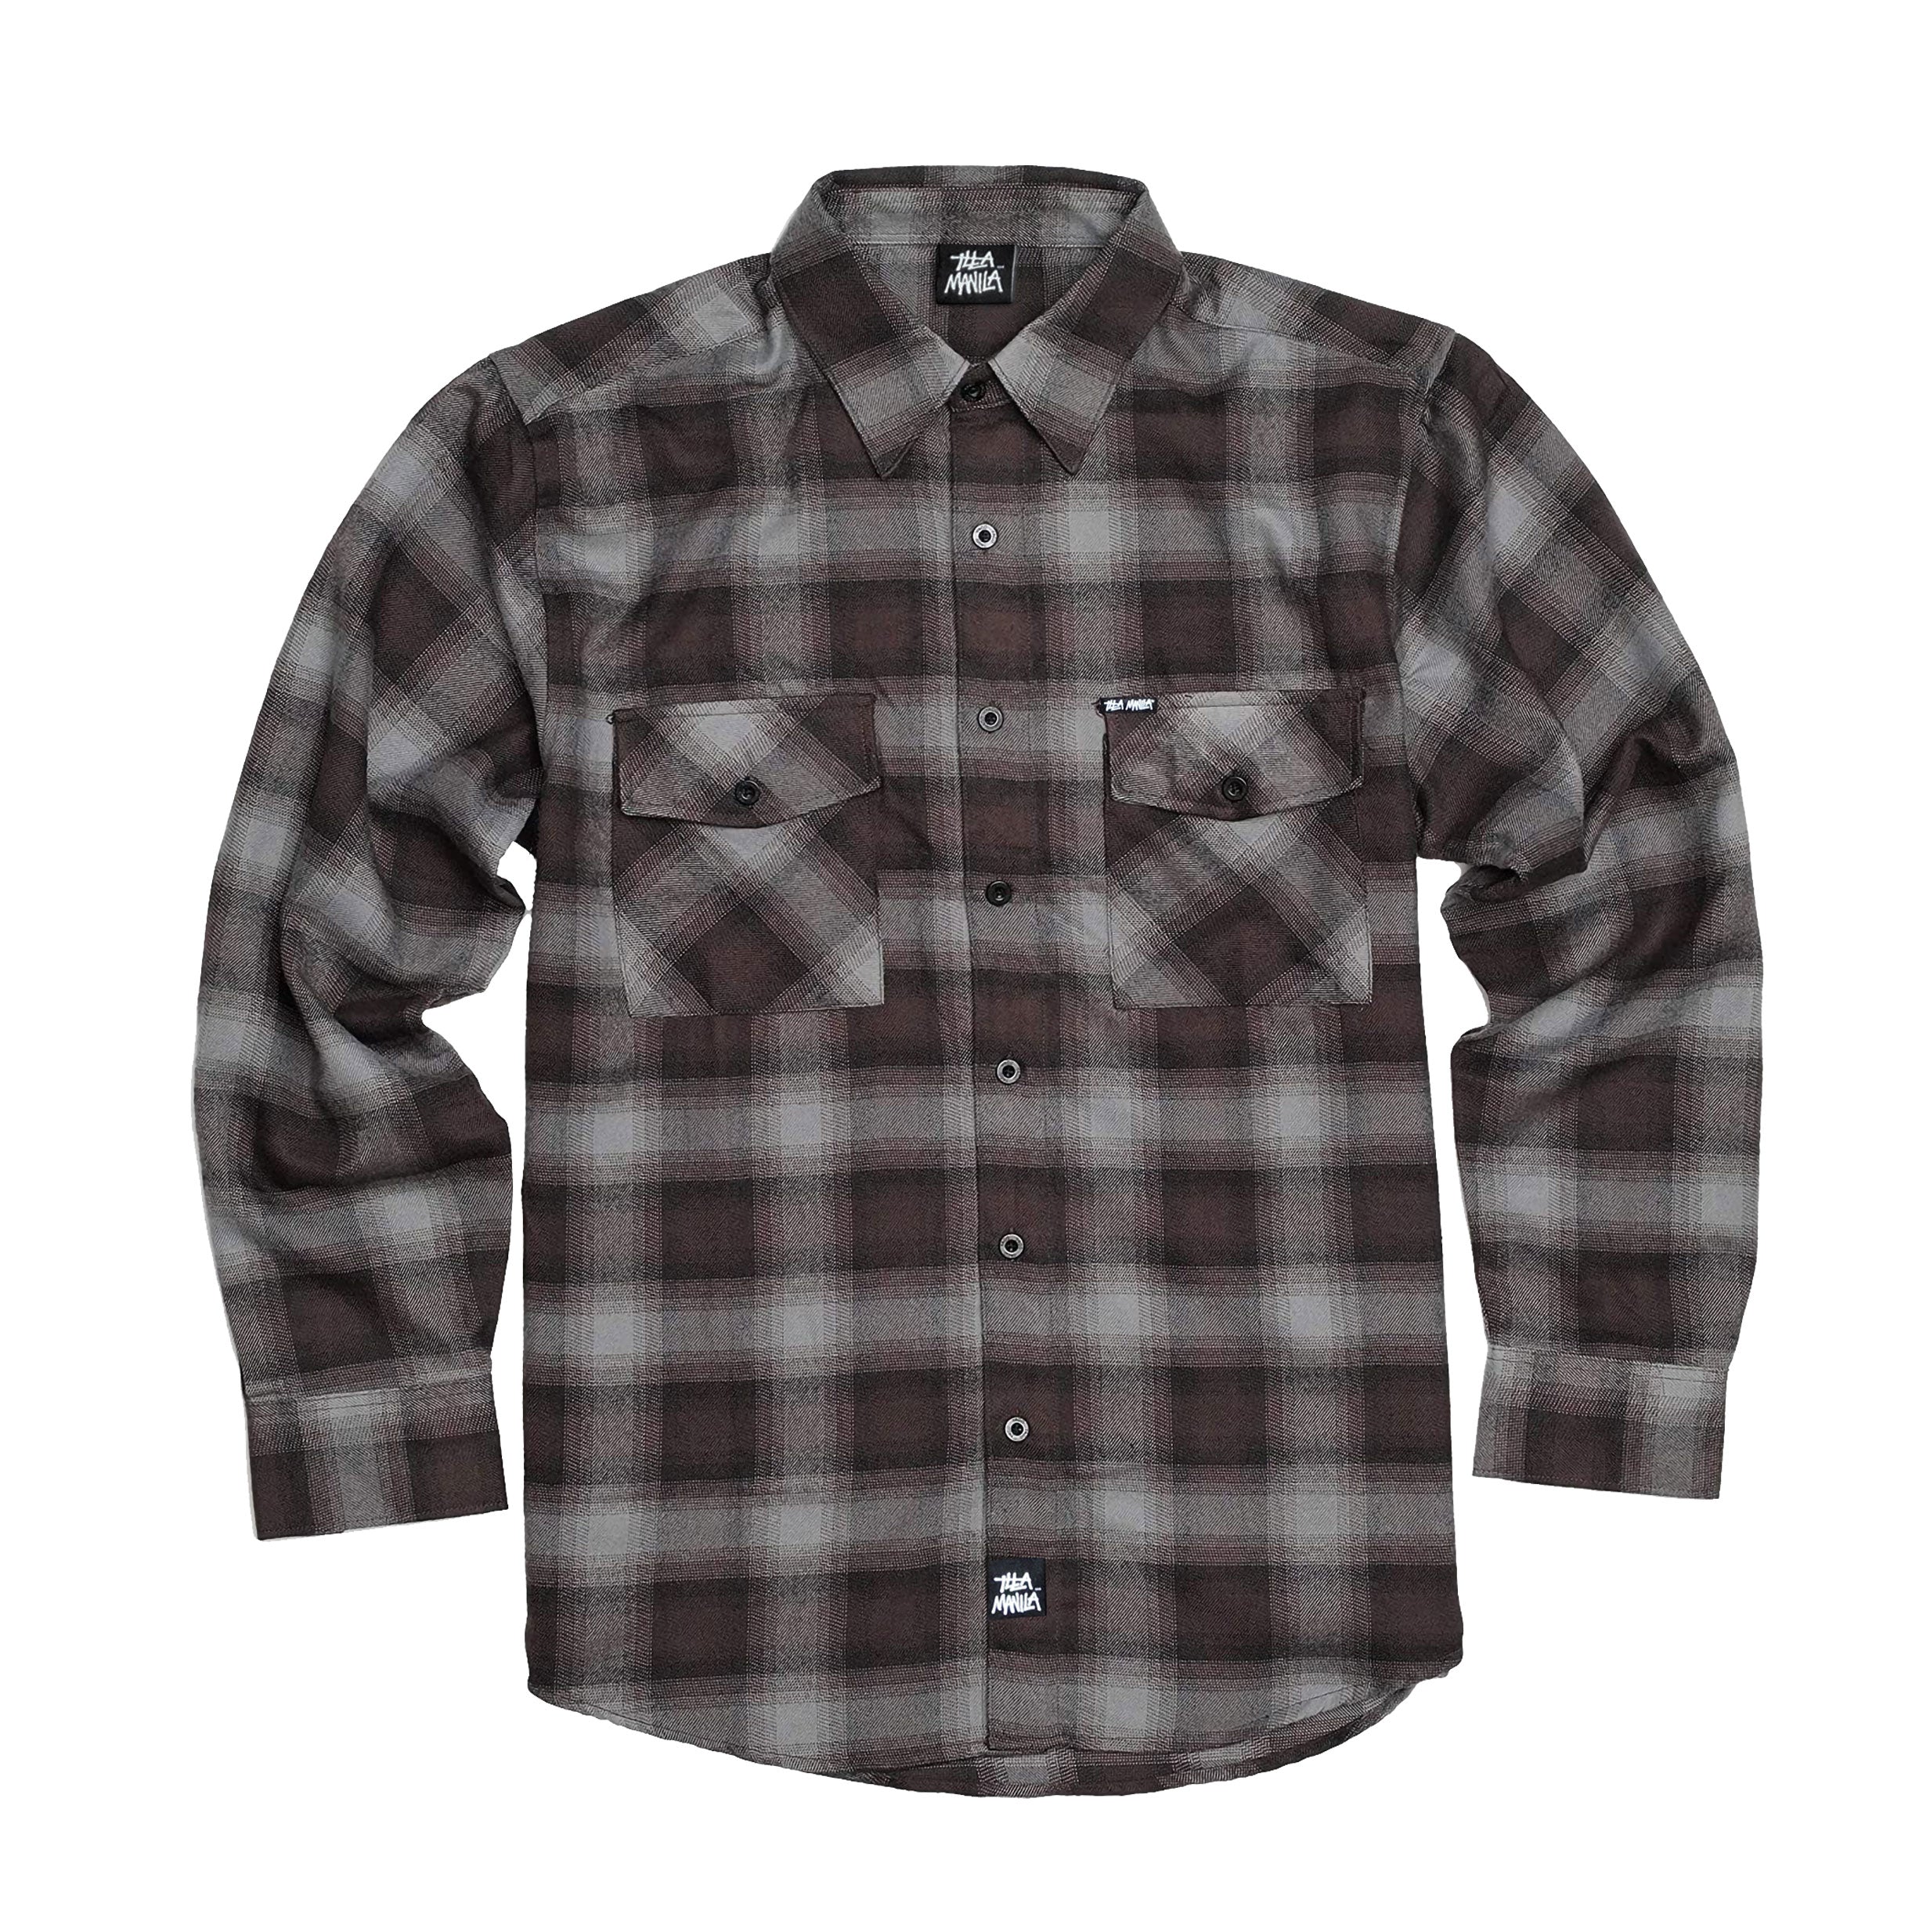 The Barrier Flannel